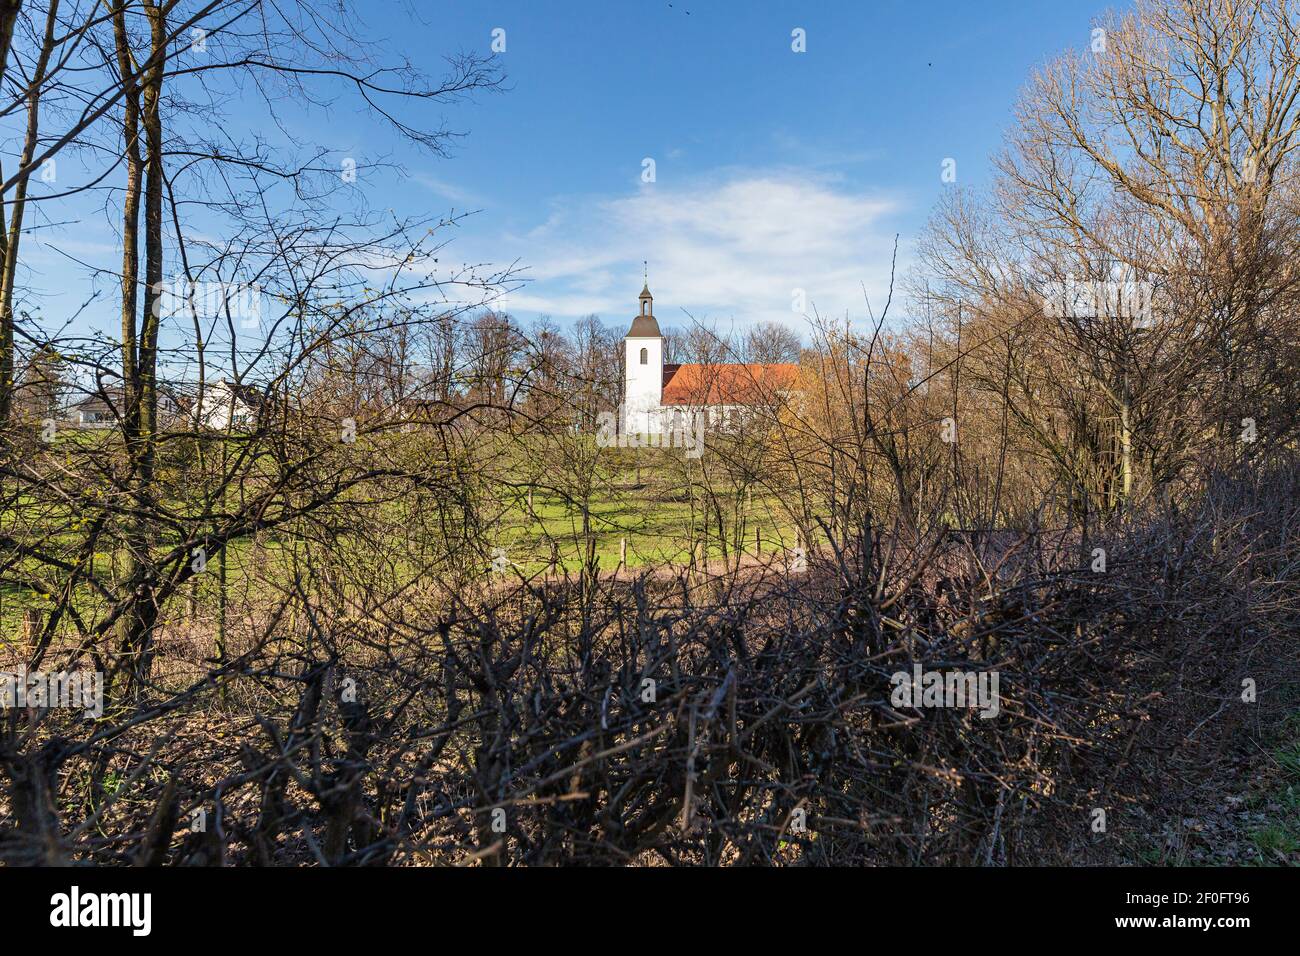 Duisburg - View to the village church which is the oldest church in Friemersheim and evangelical since 1560, North Rhine Westphalia, 05.03.2021 Stock Photo